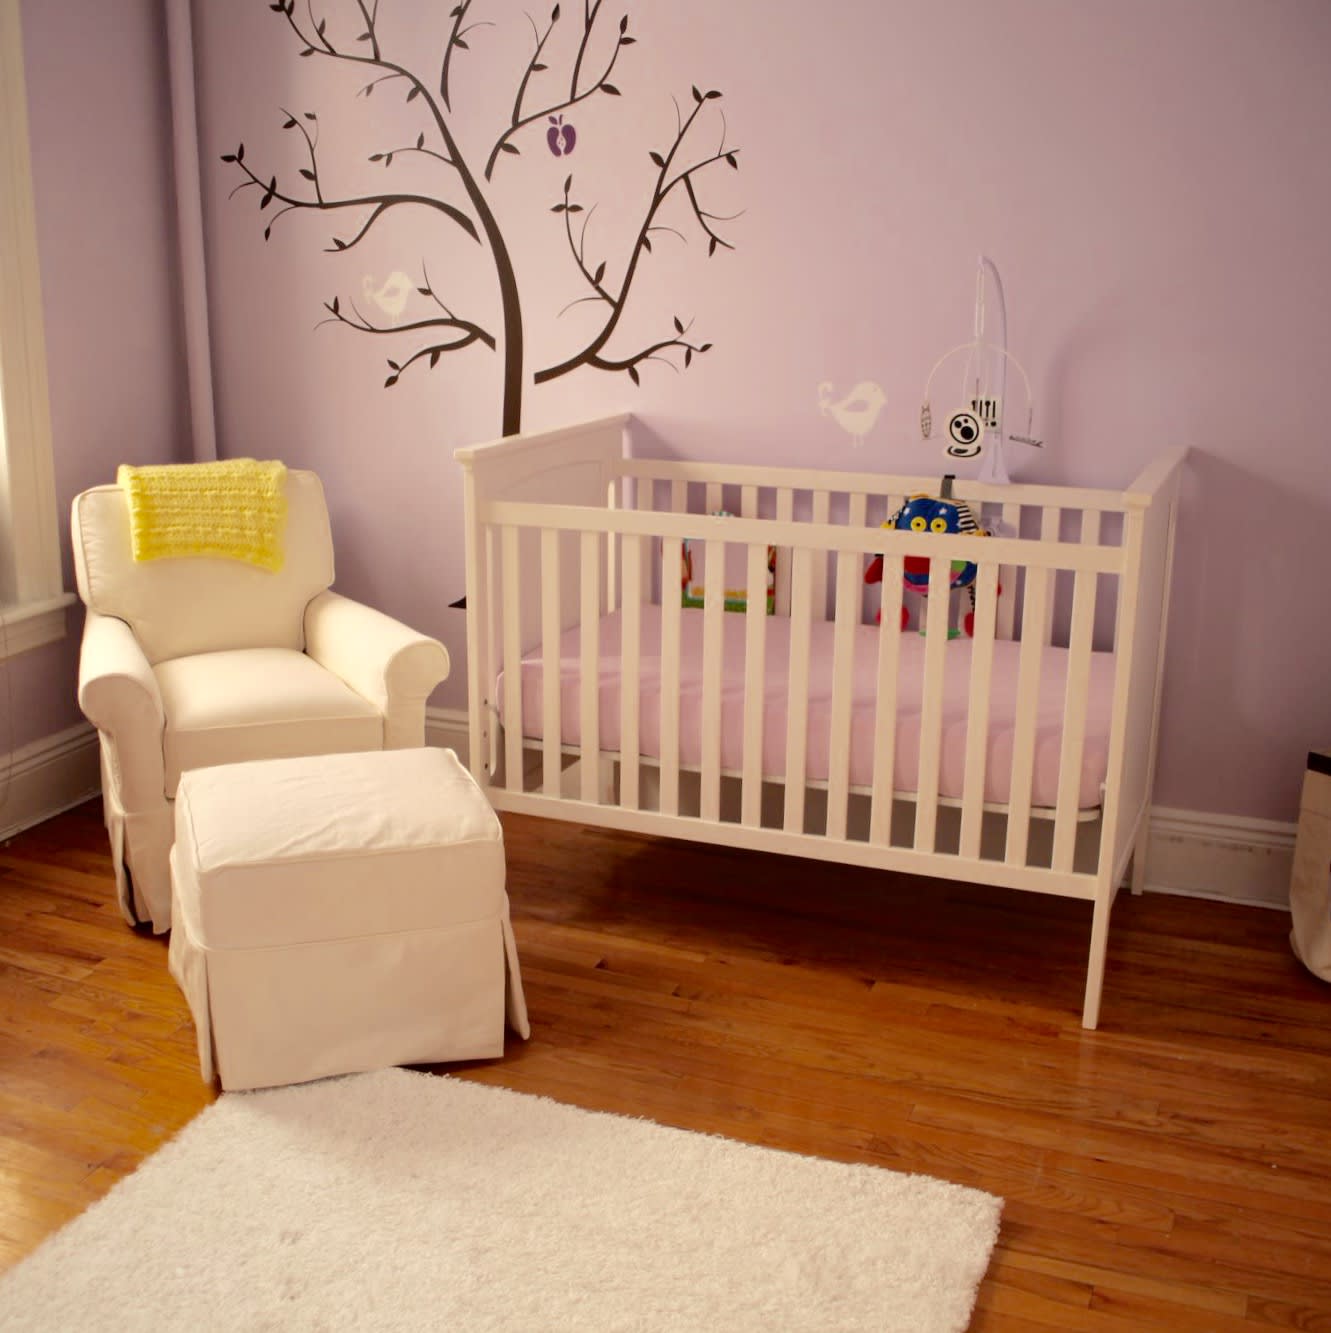 Popular Normalization blanket Nursery decorating ideas and tips: 18 things I wish I'd known